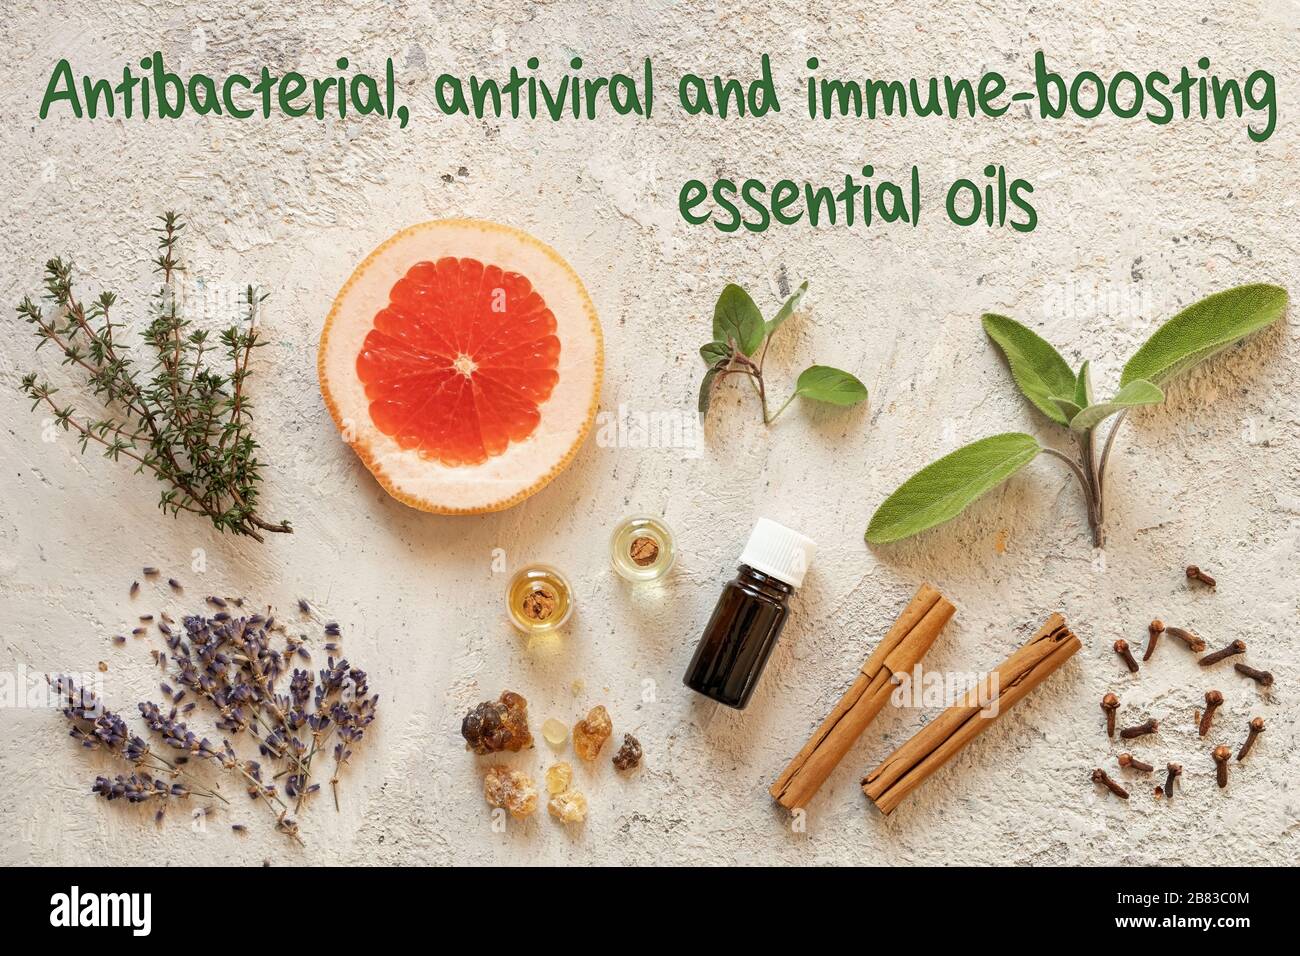 Selection of antibacterial, antiviral and immune-boosting essential oils on a bright background Stock Photo